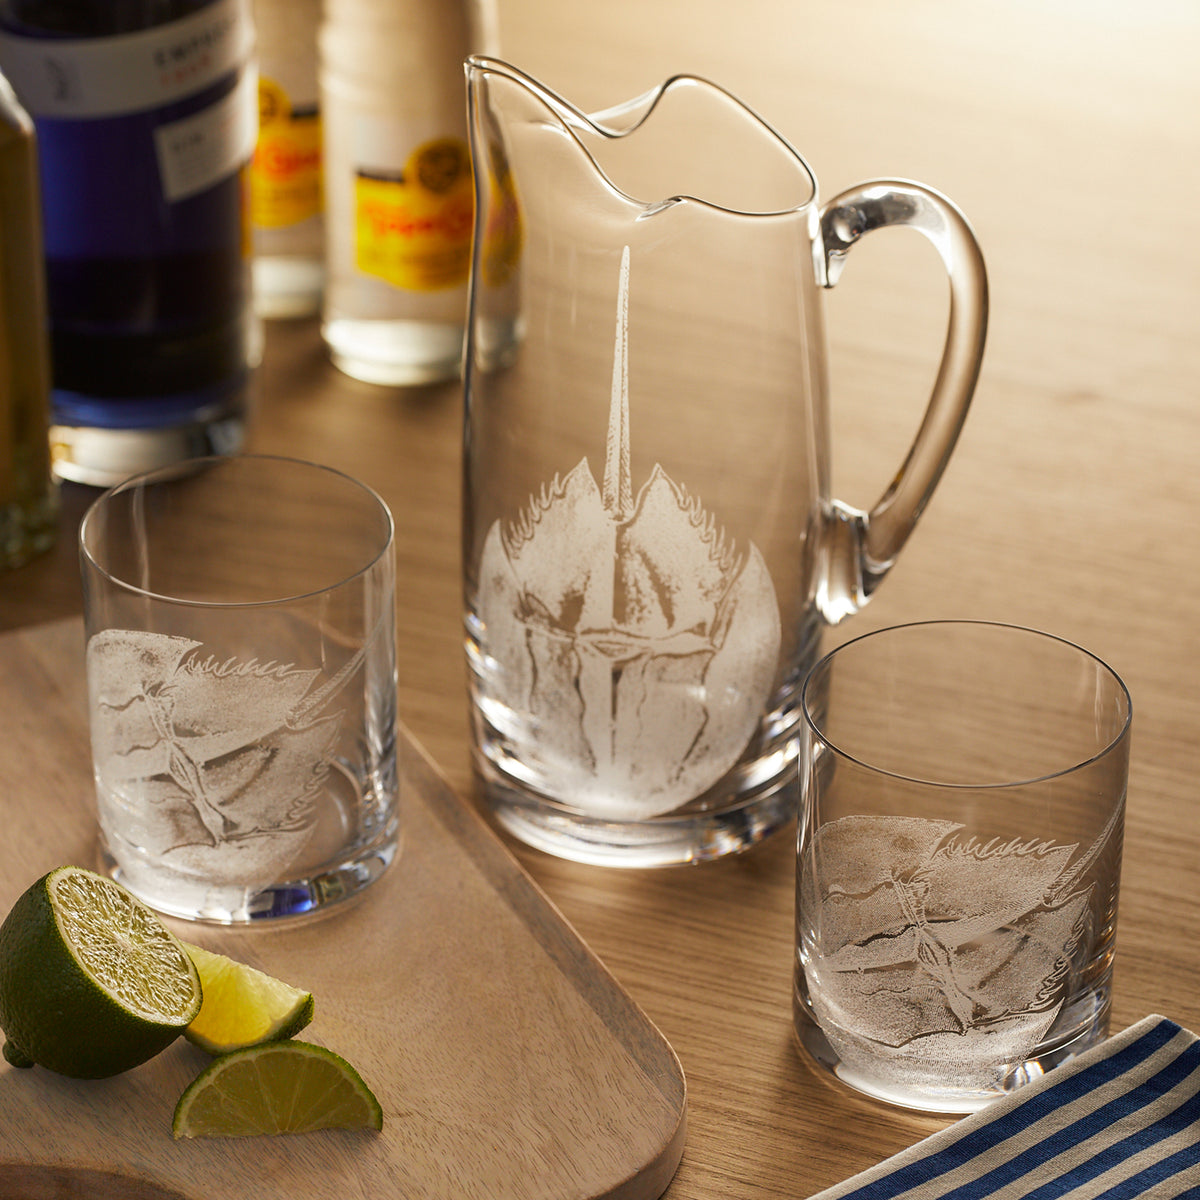 A Caskata Horseshoe Crab Small Pitcher and two glasses on a cutting board.